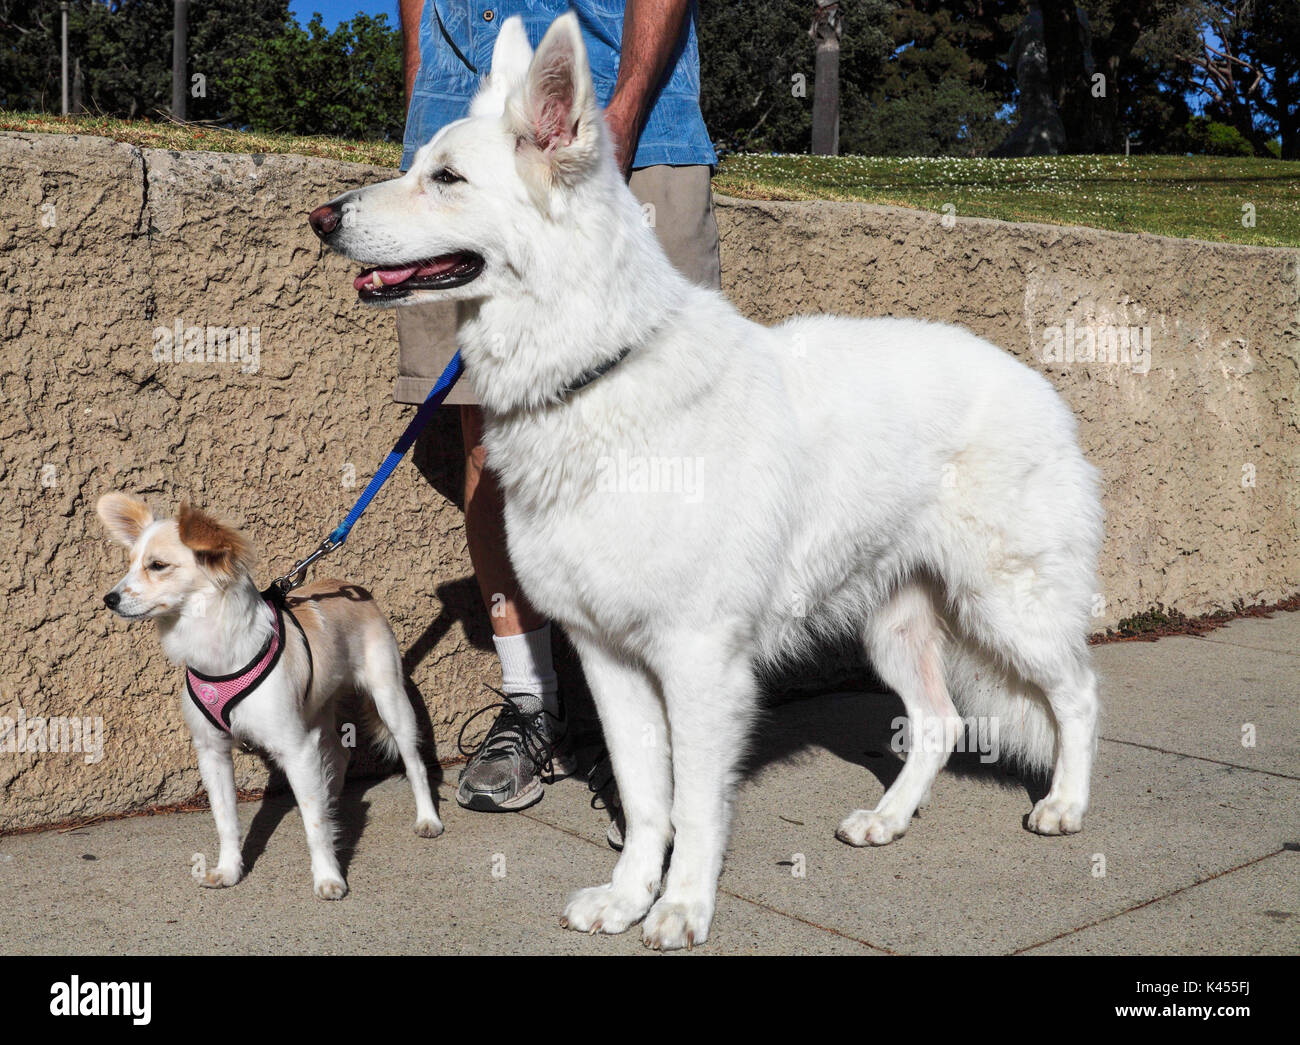 Man with large and small dogs Stock Photo